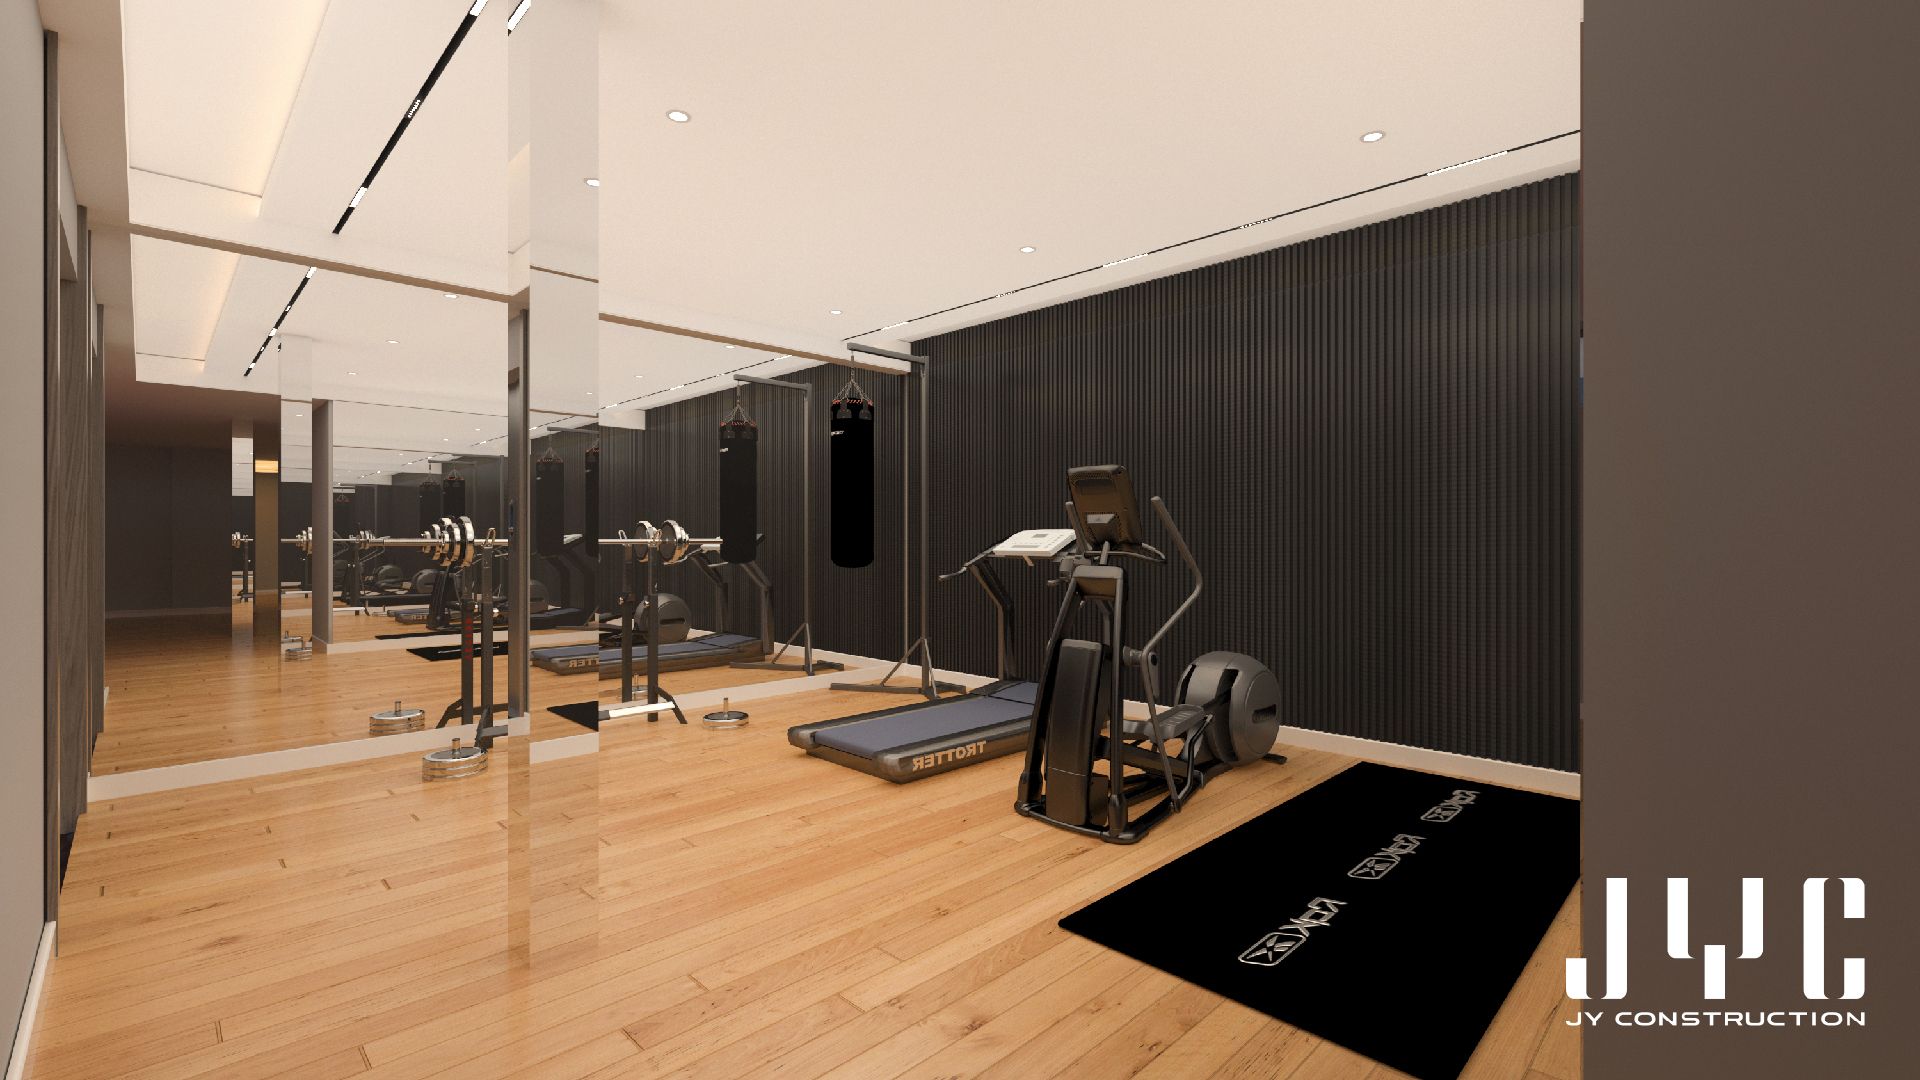 basement-renovation-gym-design-in-king-city-by-jy-construction-in-english-3.jpg